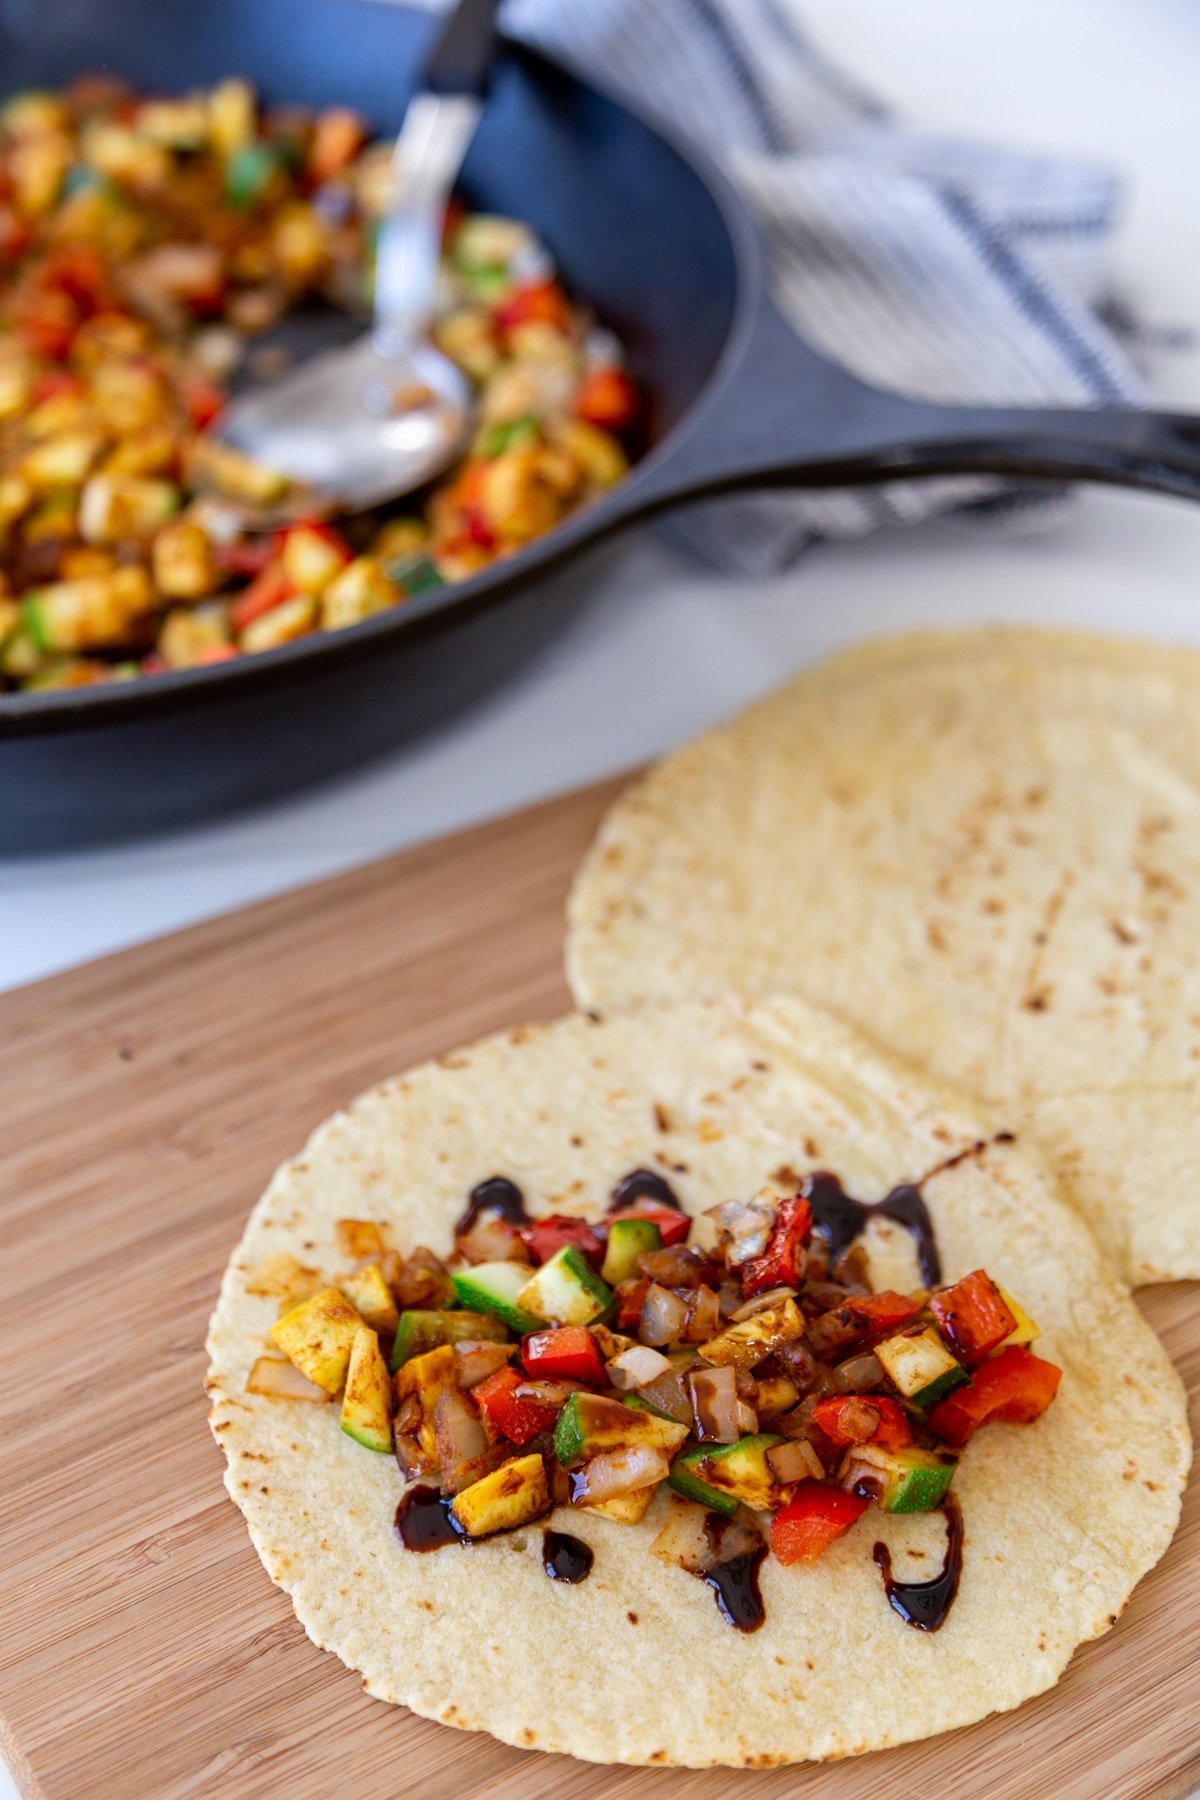 A tortilla filled with spicy veggies and drizzled with a balsamic glaze with an iron skillet with veggies behind it.